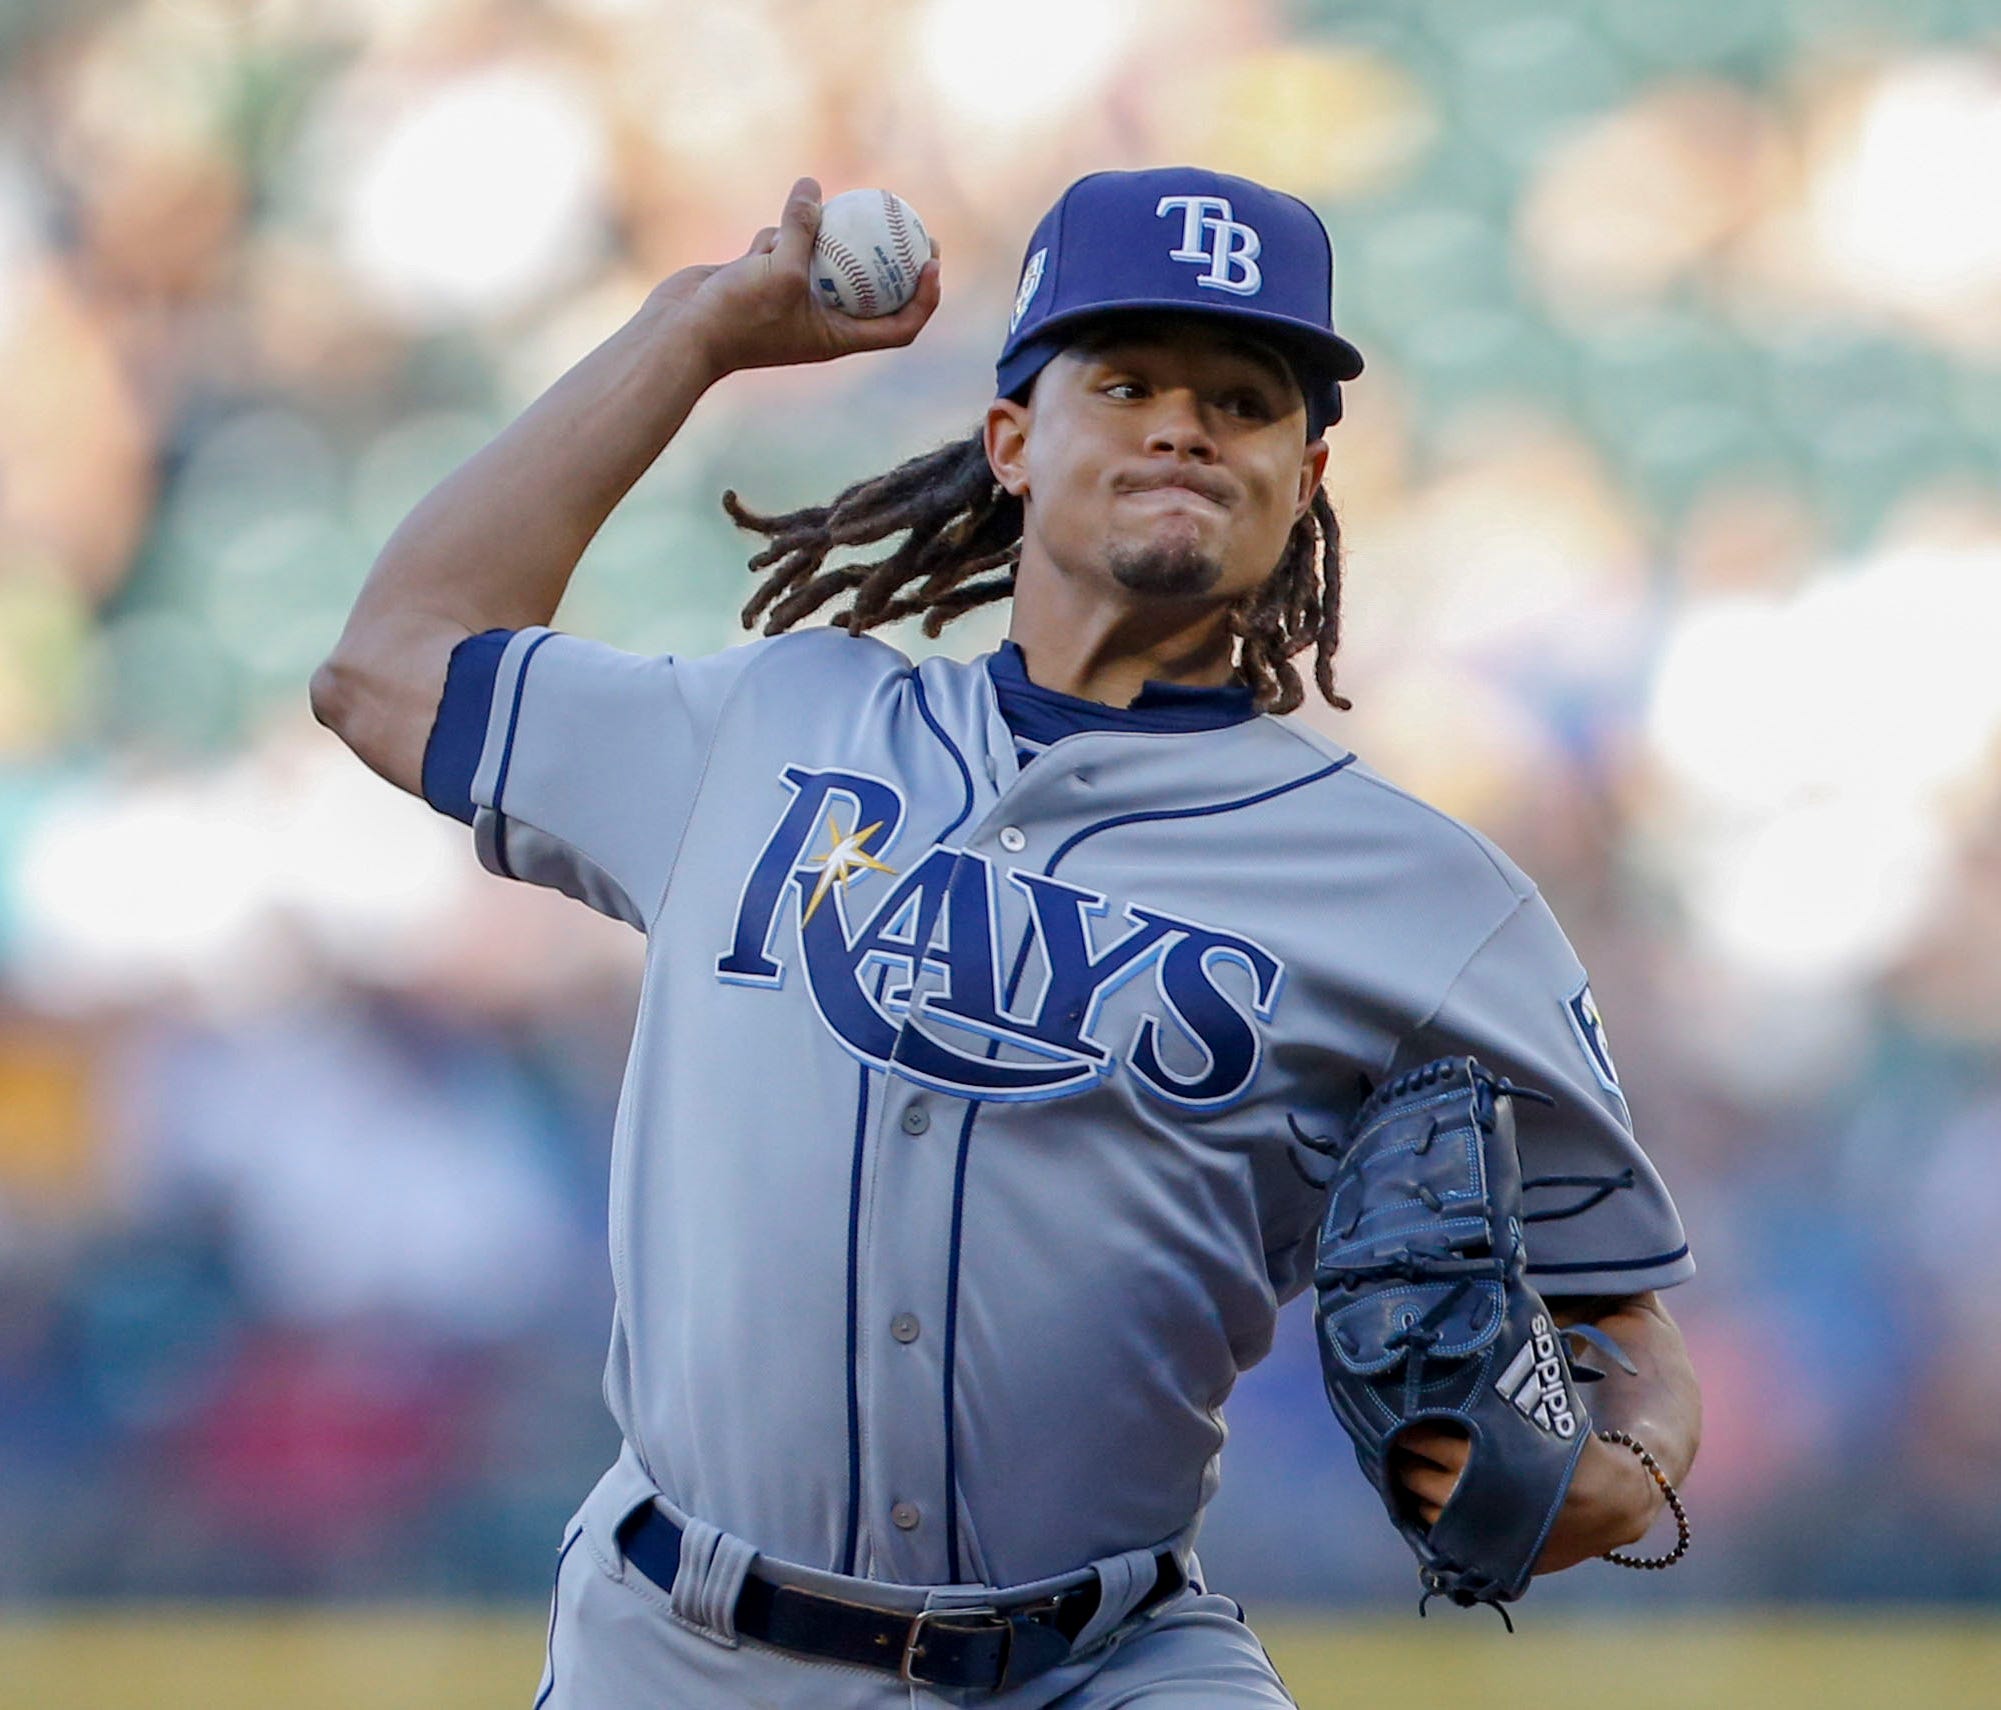 Chris Archer is 3-5 with a 4.31 ERA this year and 22-36 with a 4.10 ERA the last three years.